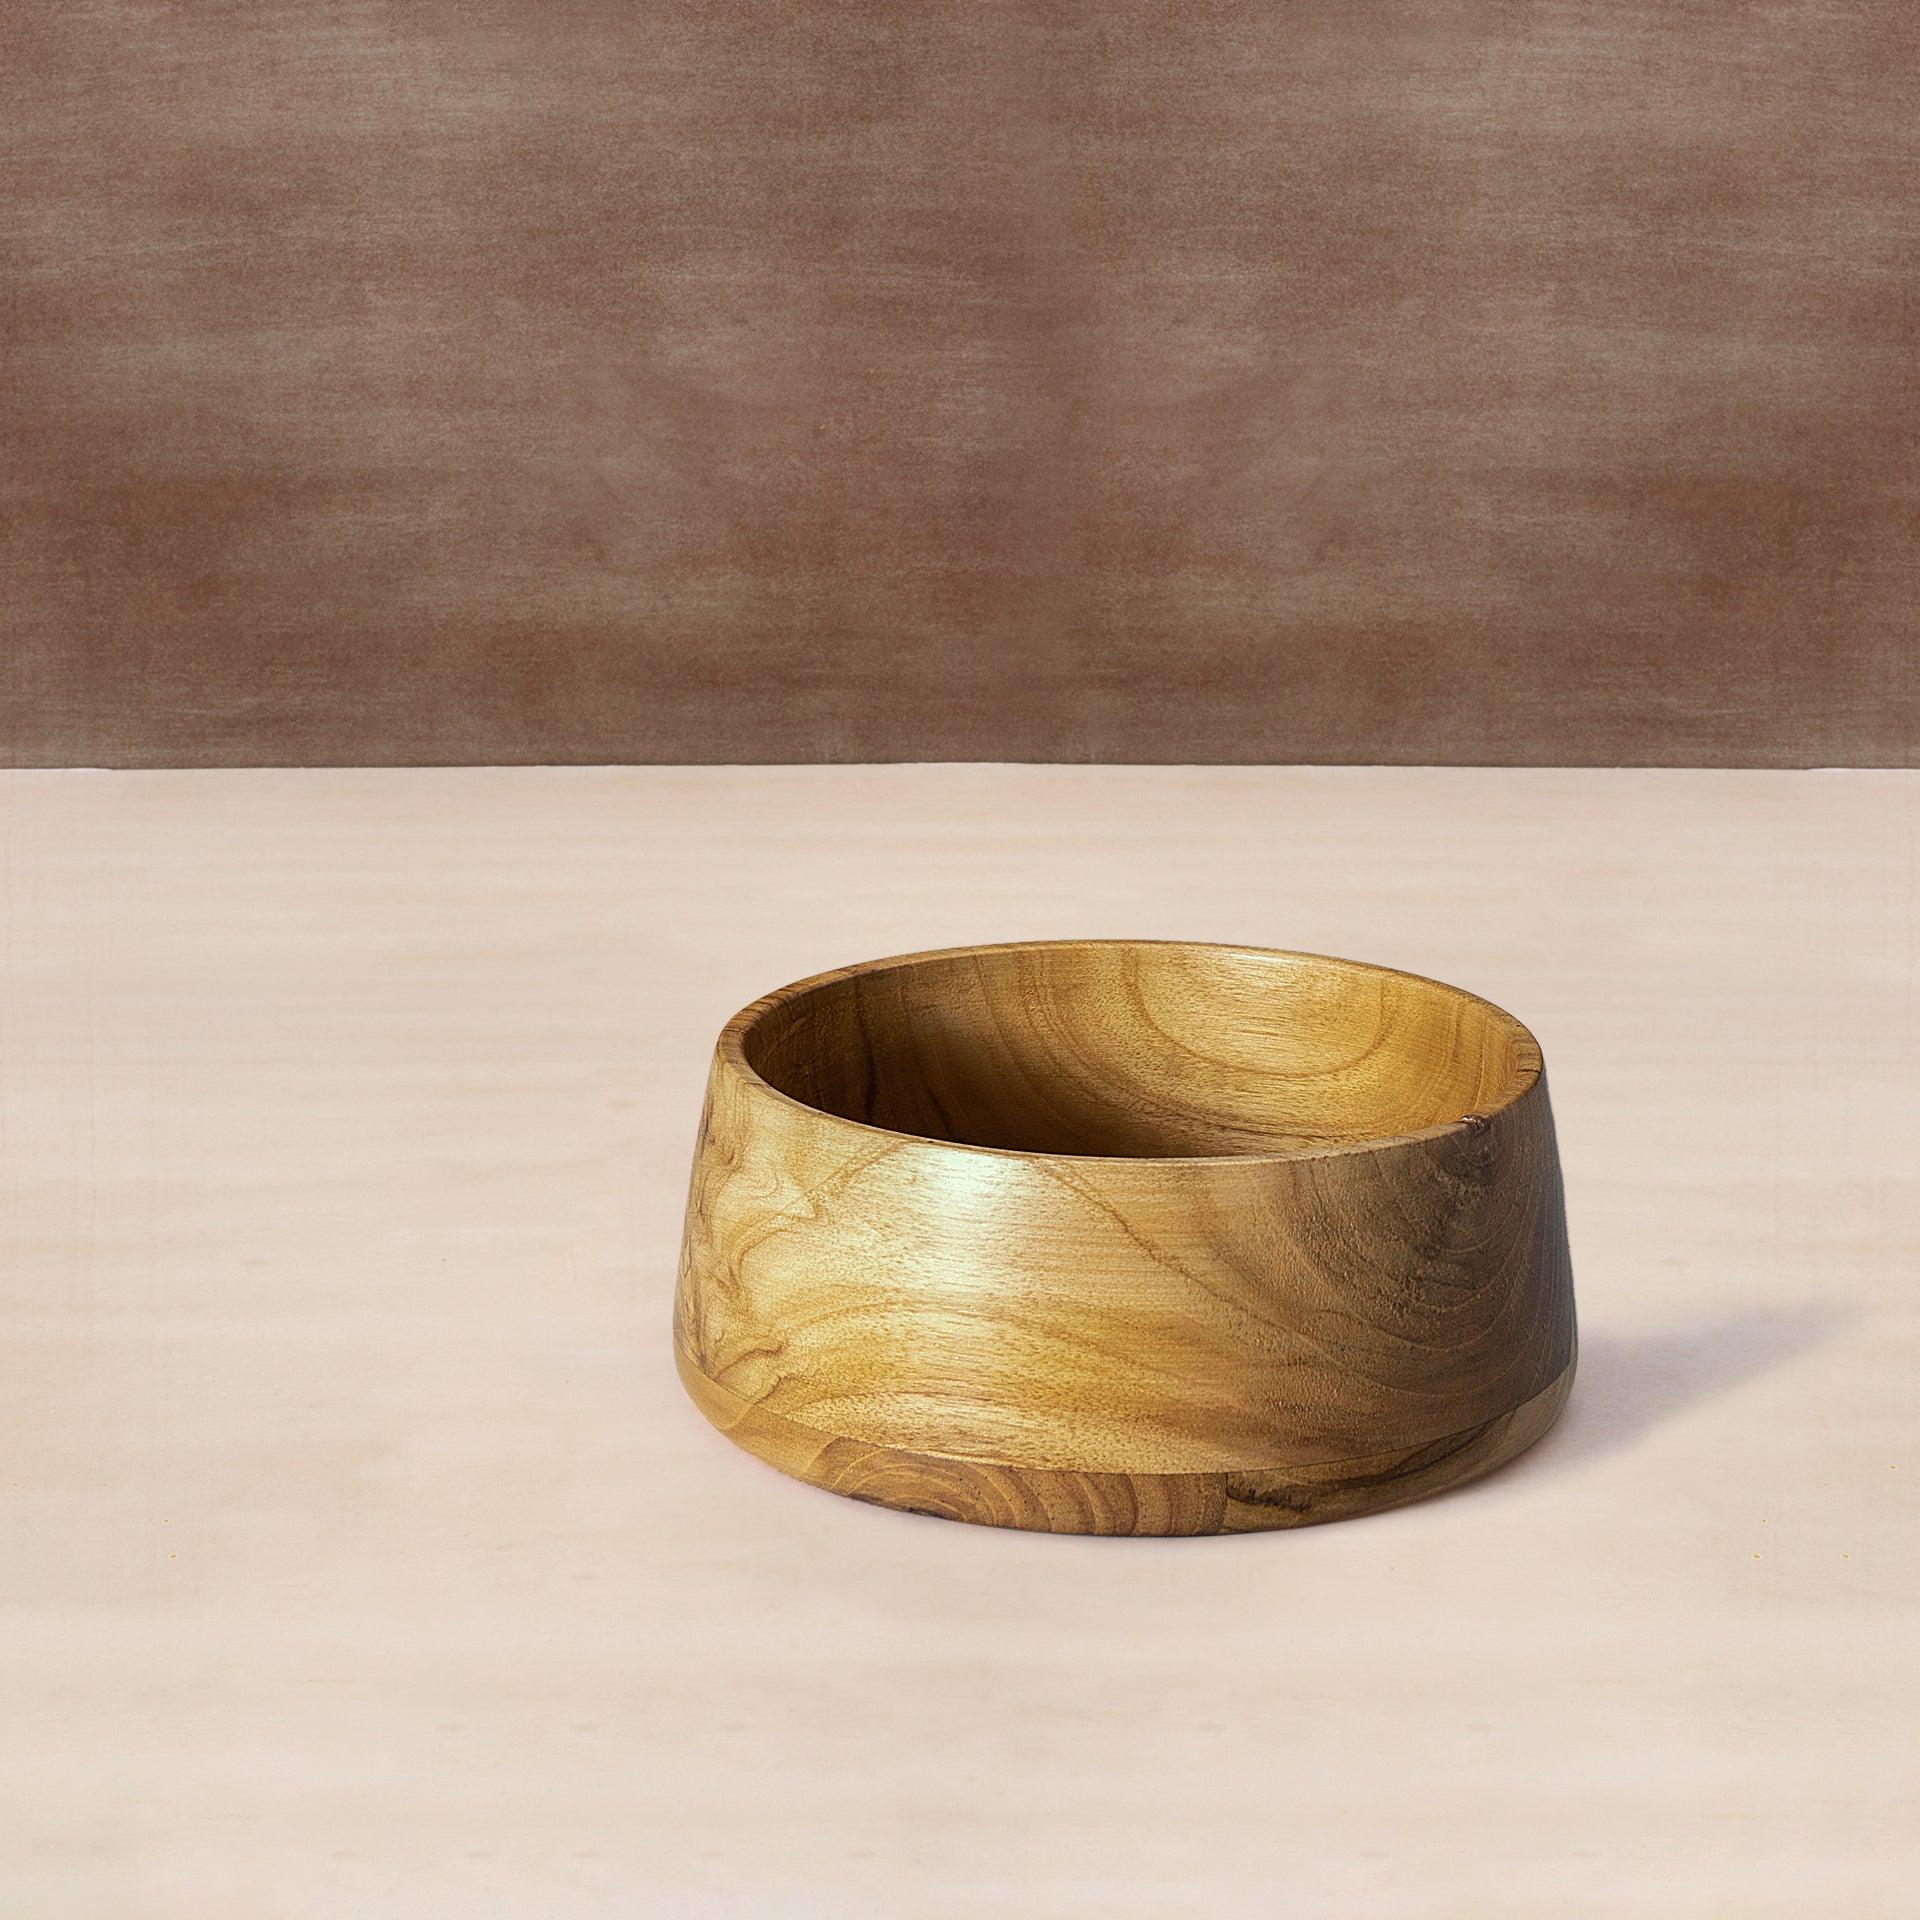 In Teak Wooden Bowl - Small